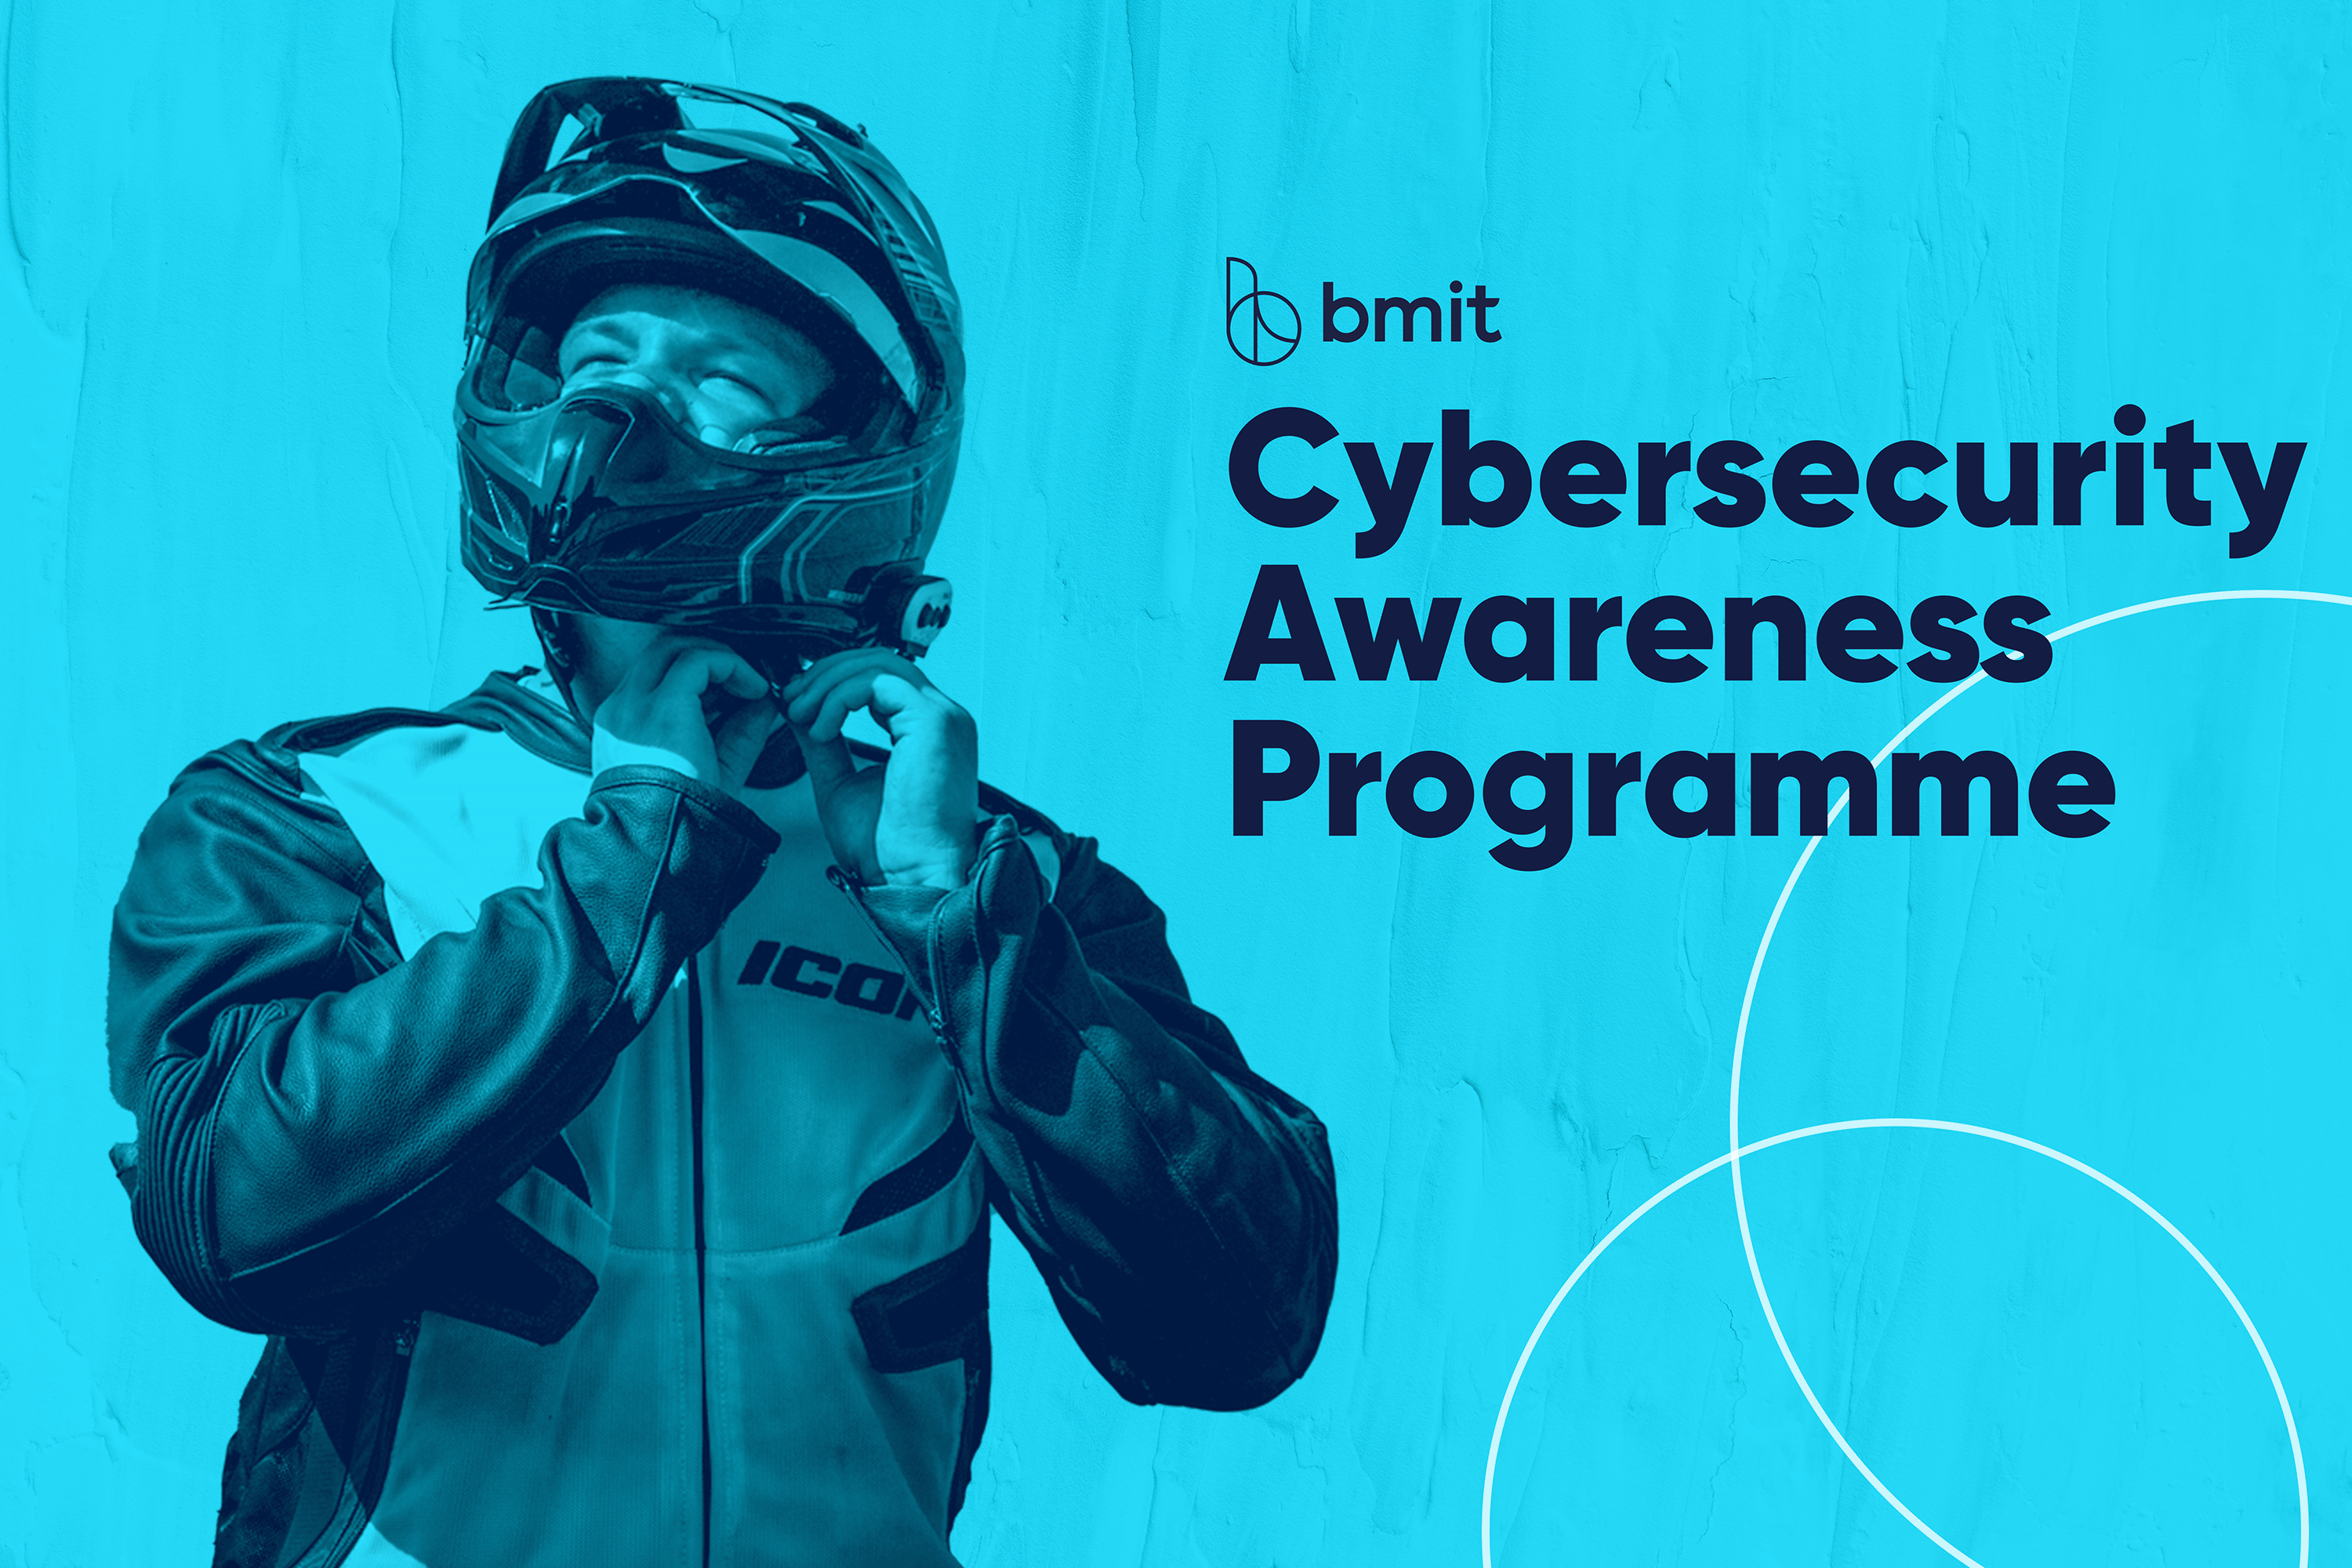 BMIT launches Cybersecurity Awareness Programme for businesses